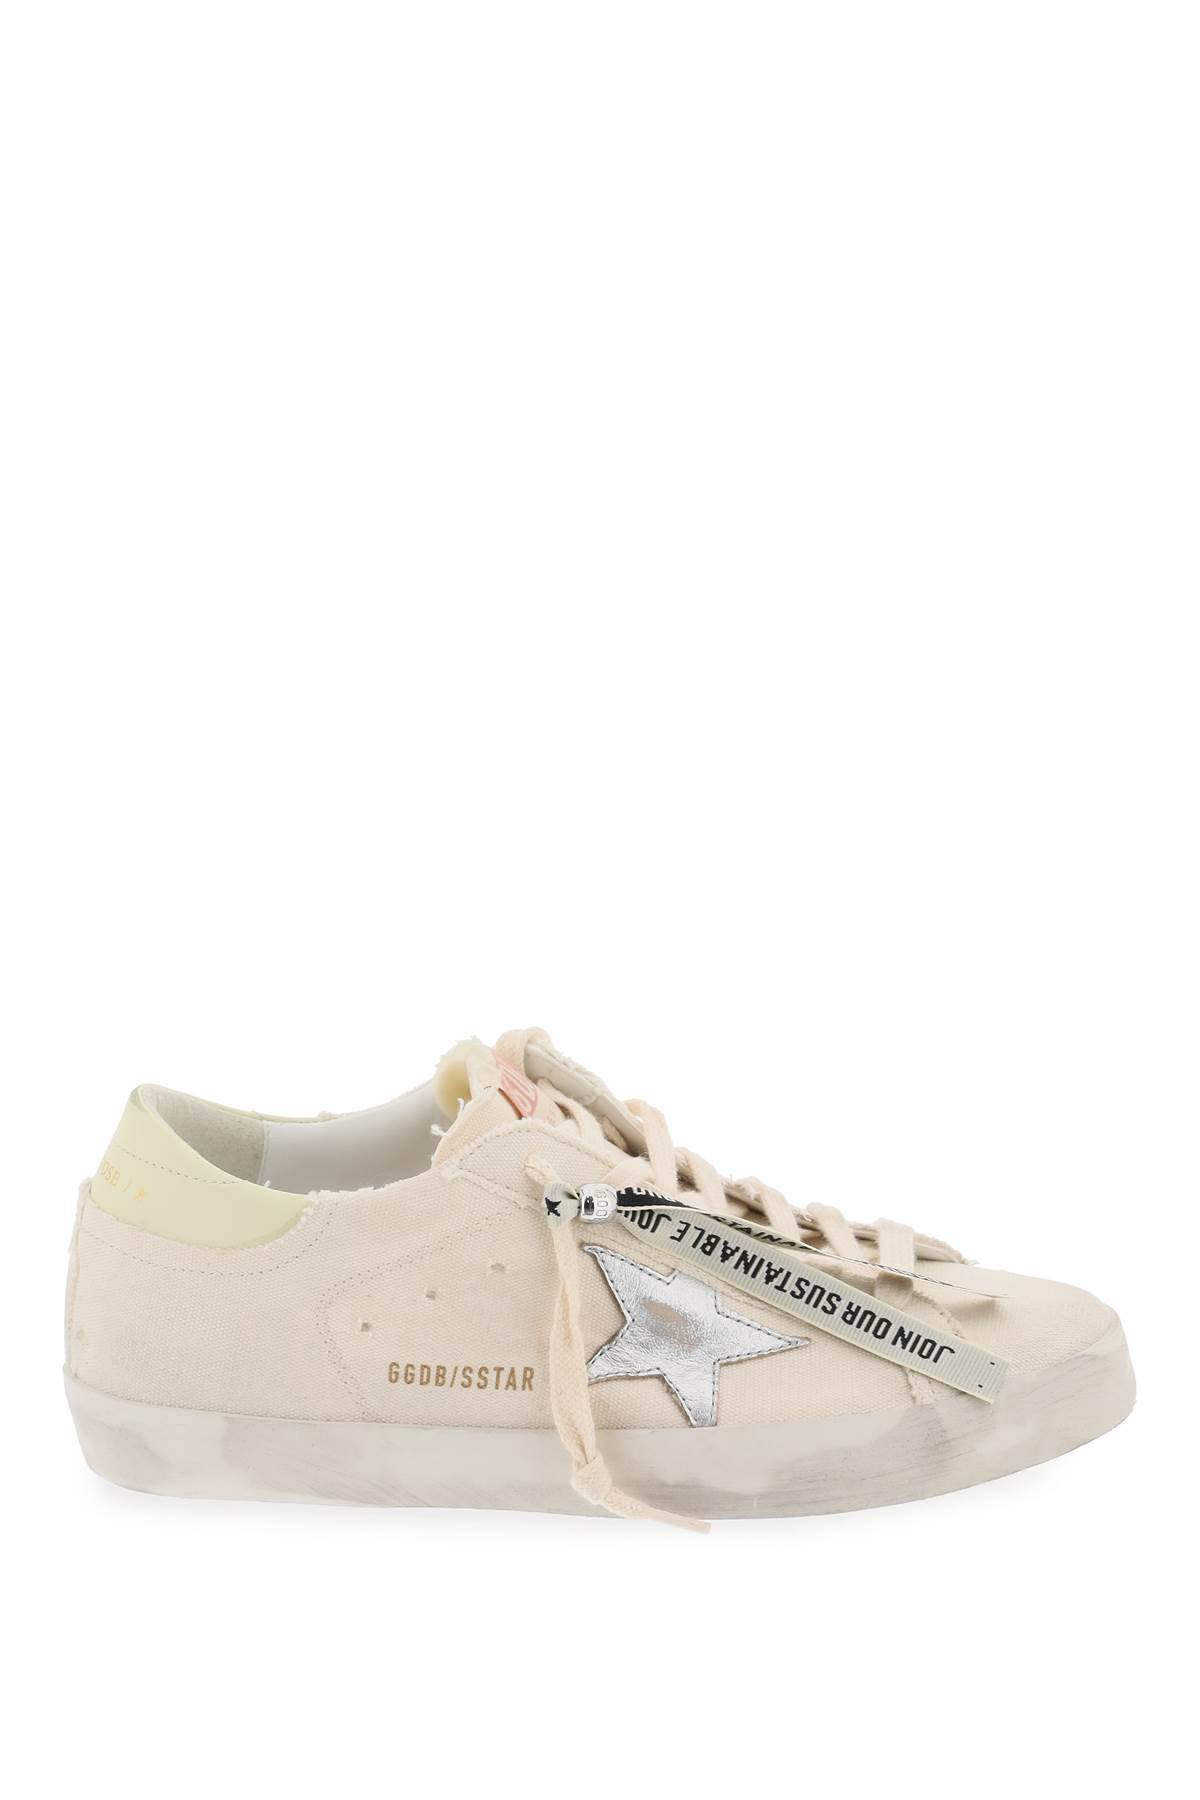 Shop Golden Goose Super-star Canvas And Leather Sneakers In White,neutro